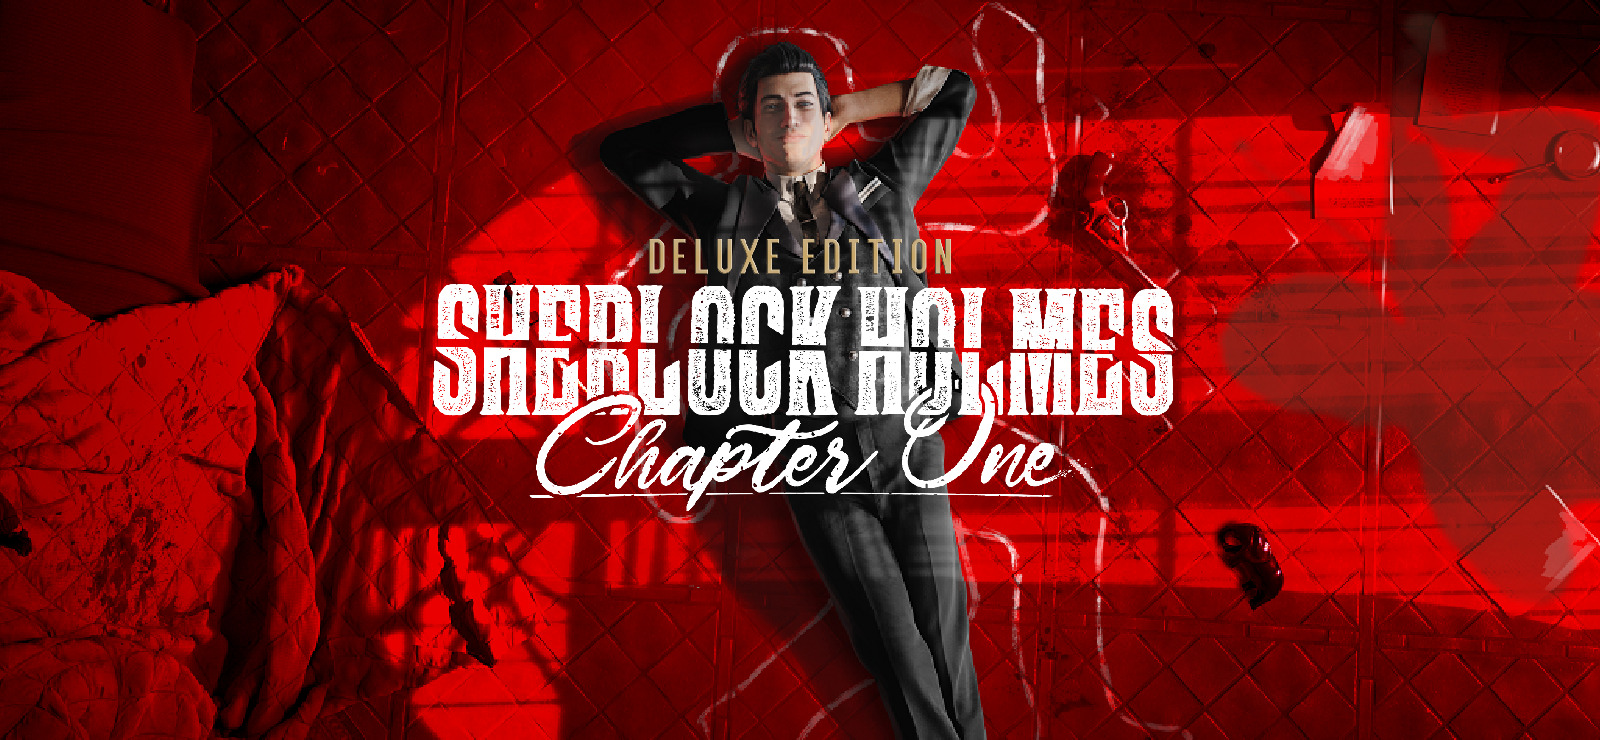 Jogo Sherlock Holmes Chapter One Deluxe Edition - PC GOG